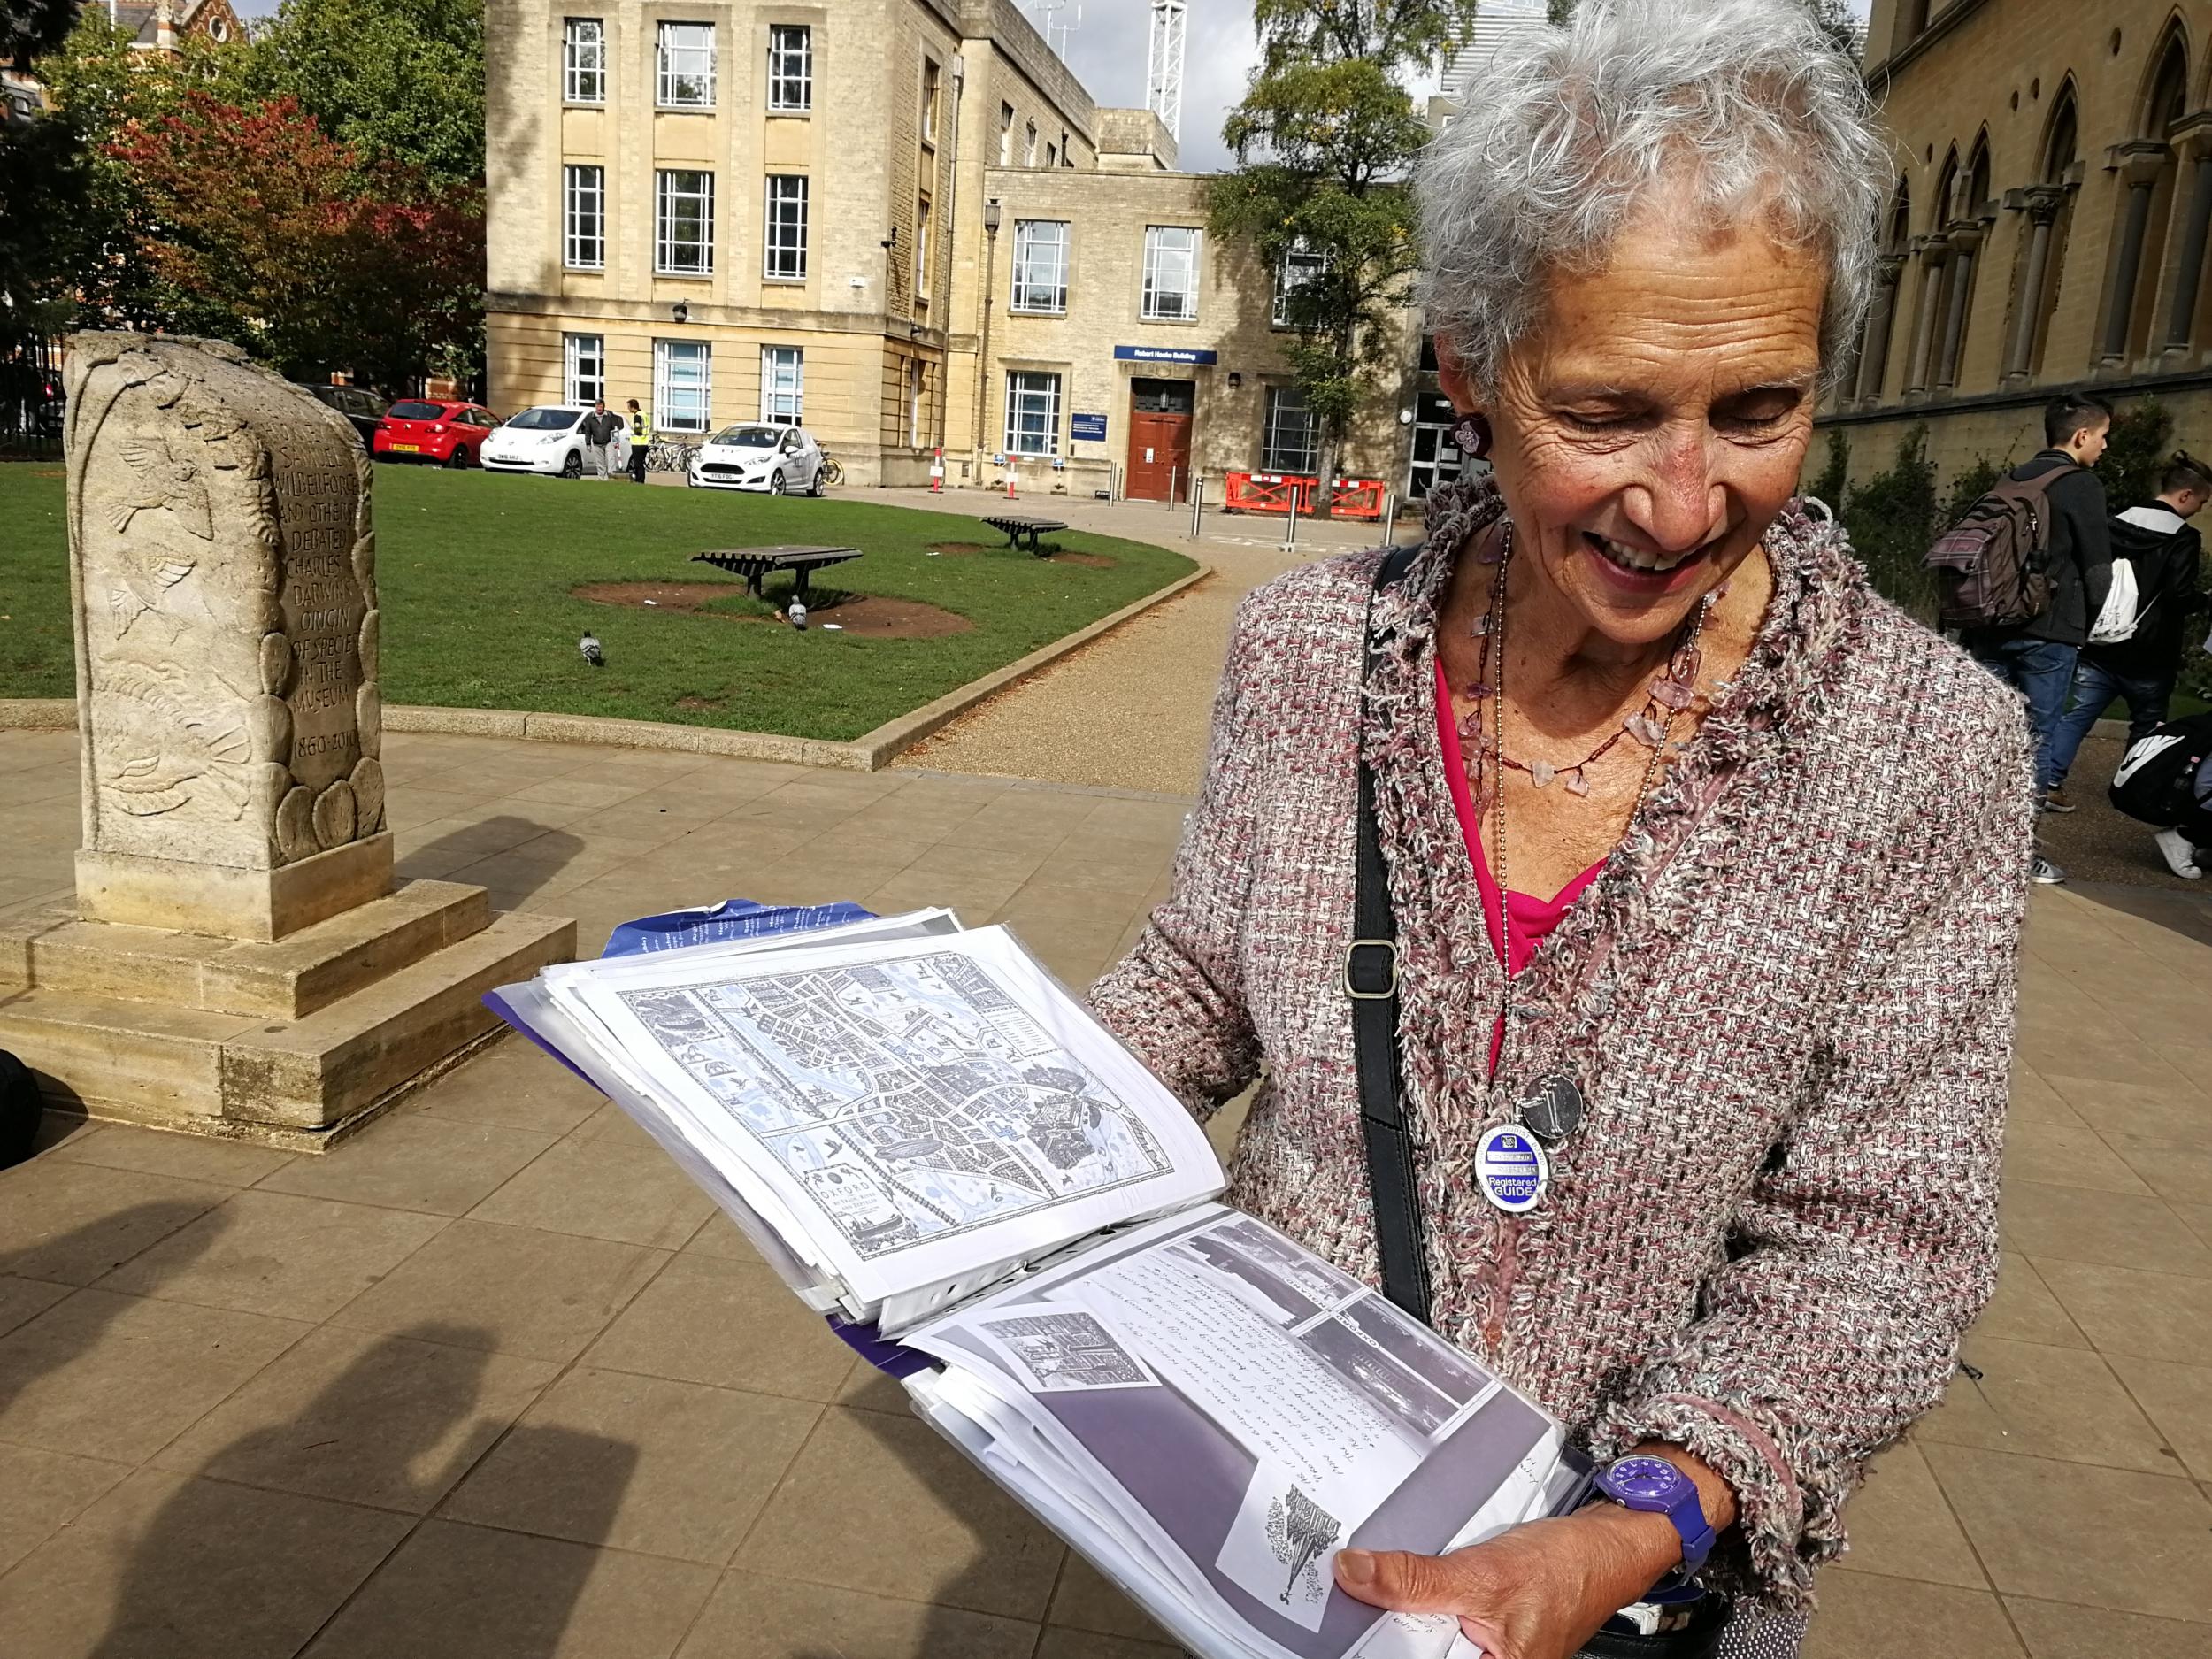 Guide Terry Brenble has been giving tours of Oxford for 30 years